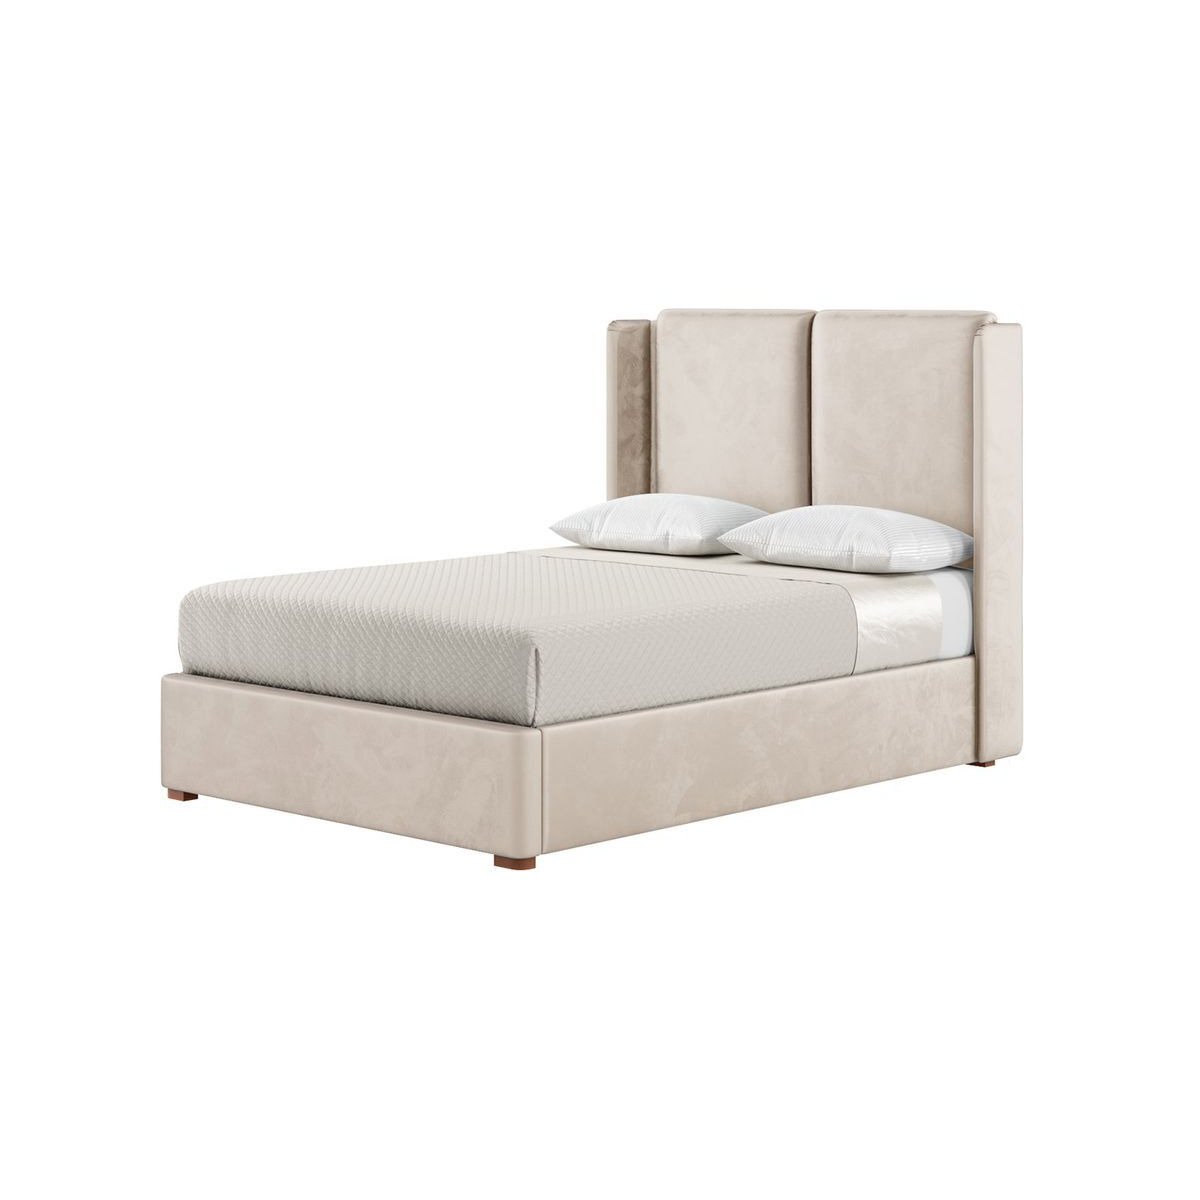 Felix 4ft6 Double Bed Frame With Contemporary Twin Panel Wing Headboard, light beige, Leg colour: aveo - image 1